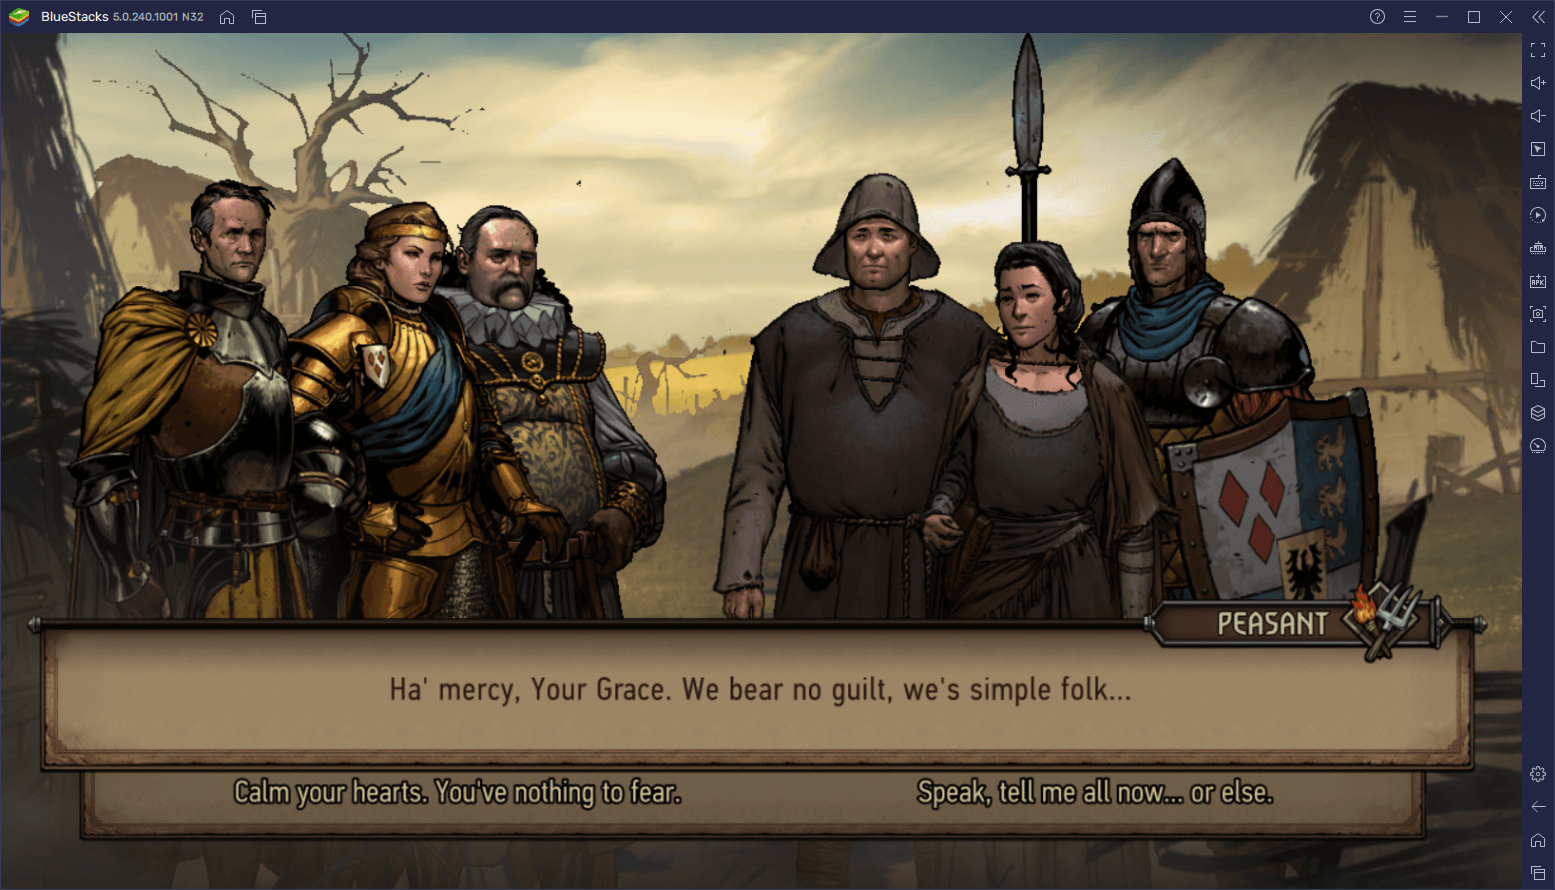 BlueStacks’ Tips and Tricks for The Witcher Tales: Thronebreaker